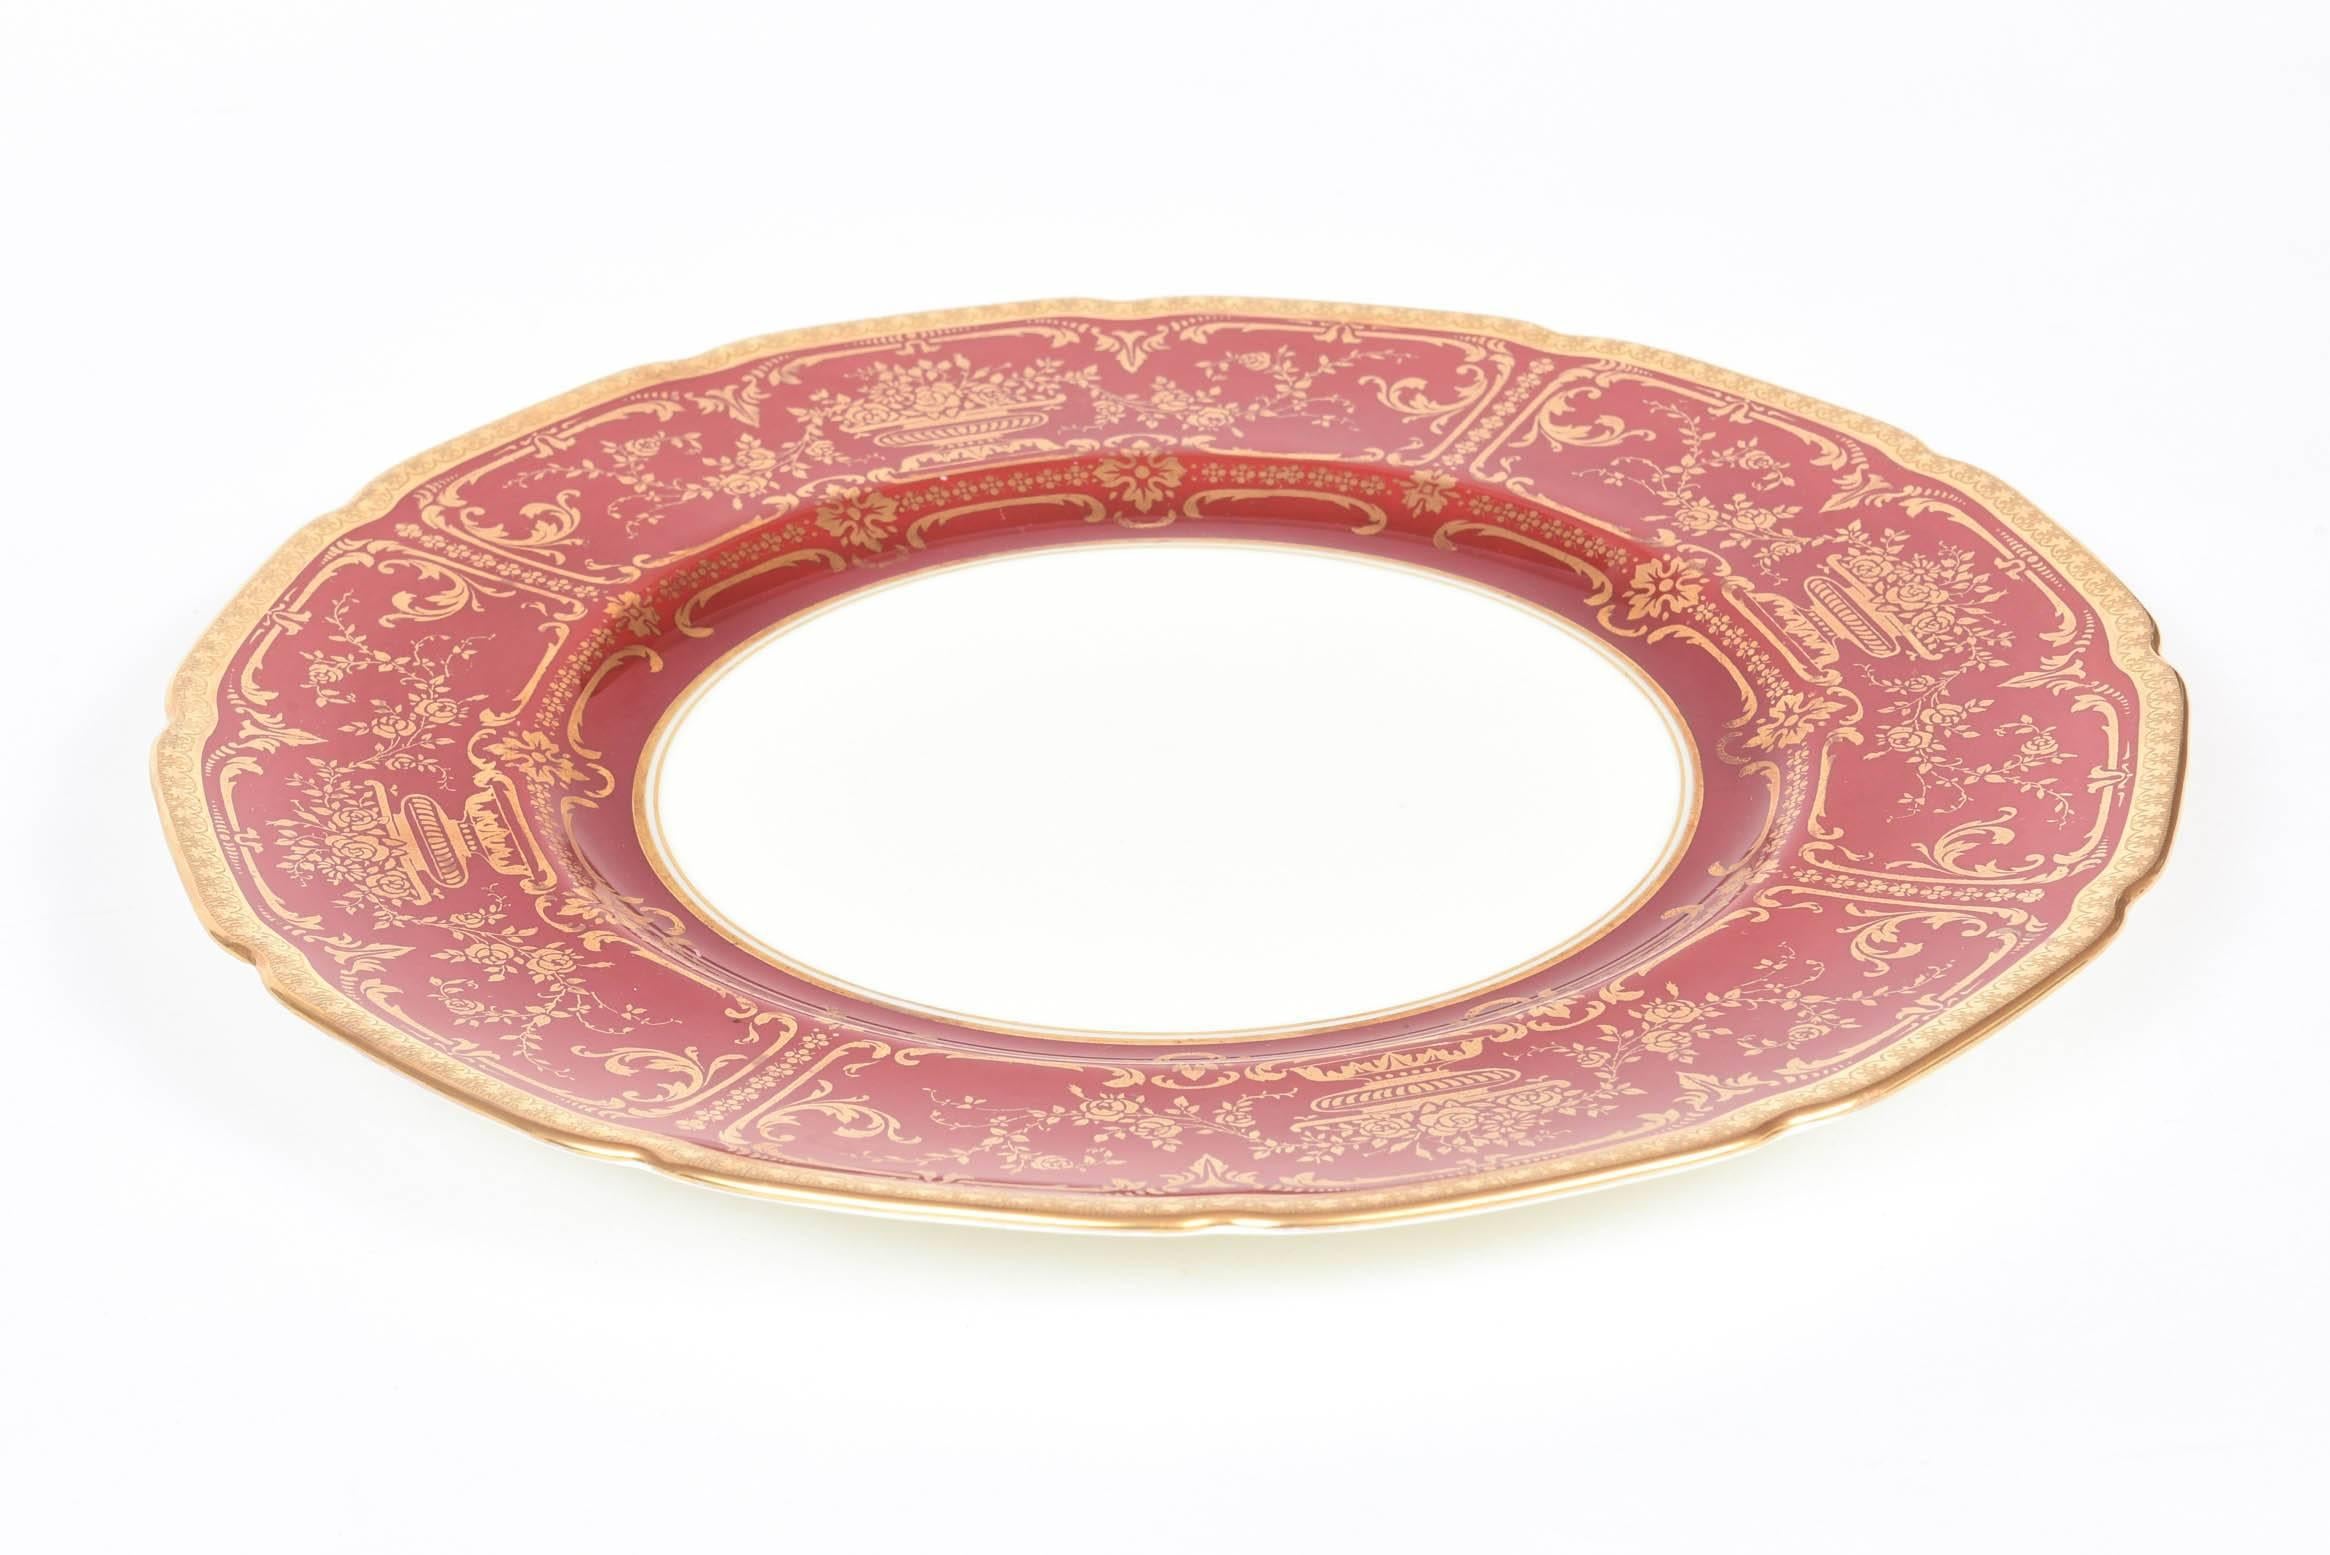 royal doulton plates with gold trim